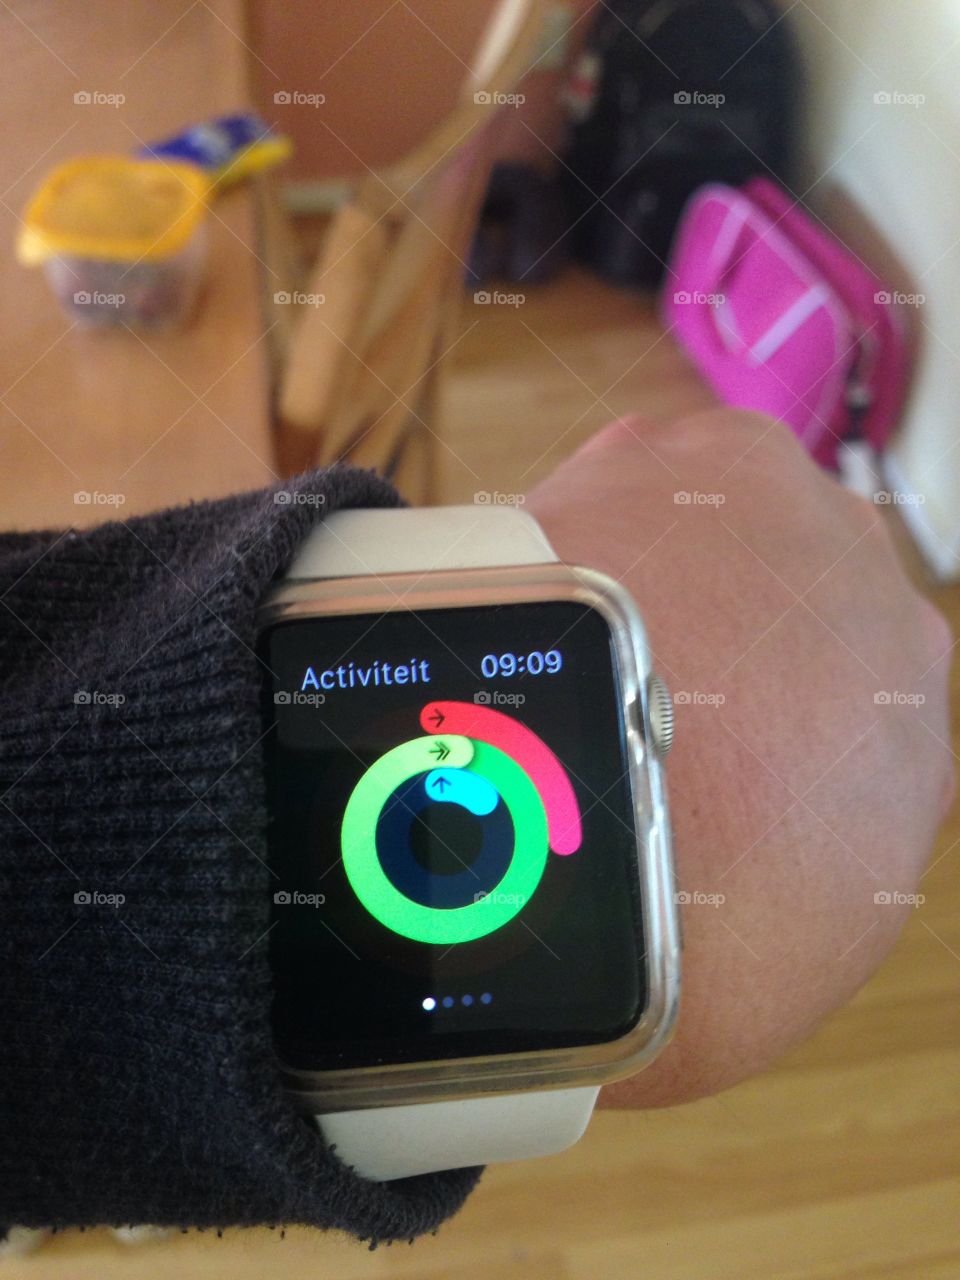 Using the activity app on the Apple Watch